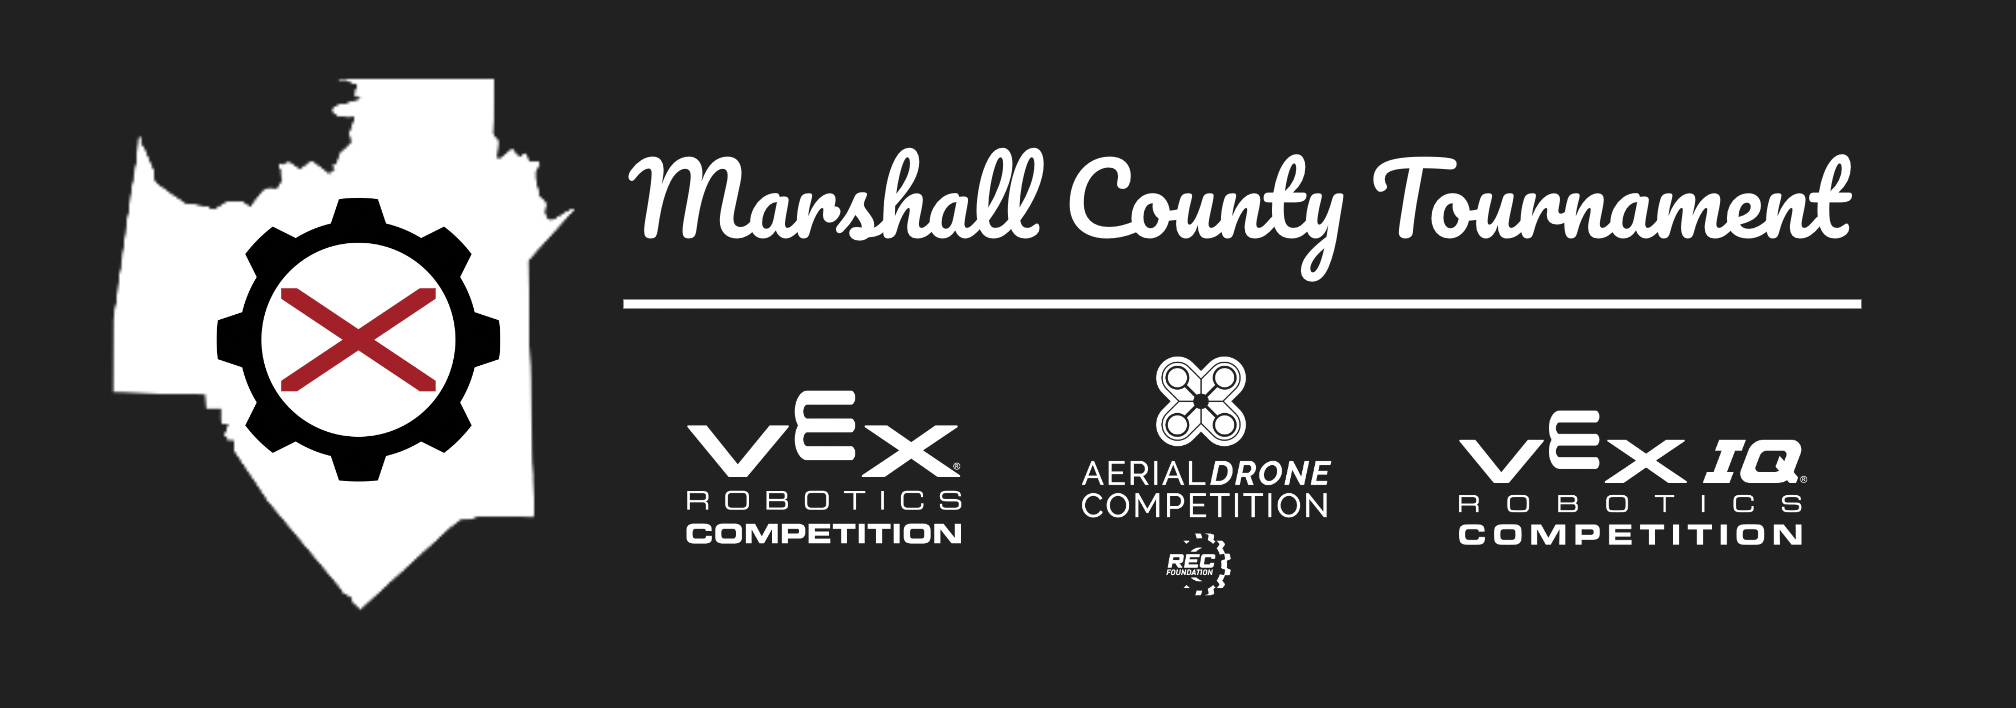 Marshall County Aerial Drone Competition Tournament